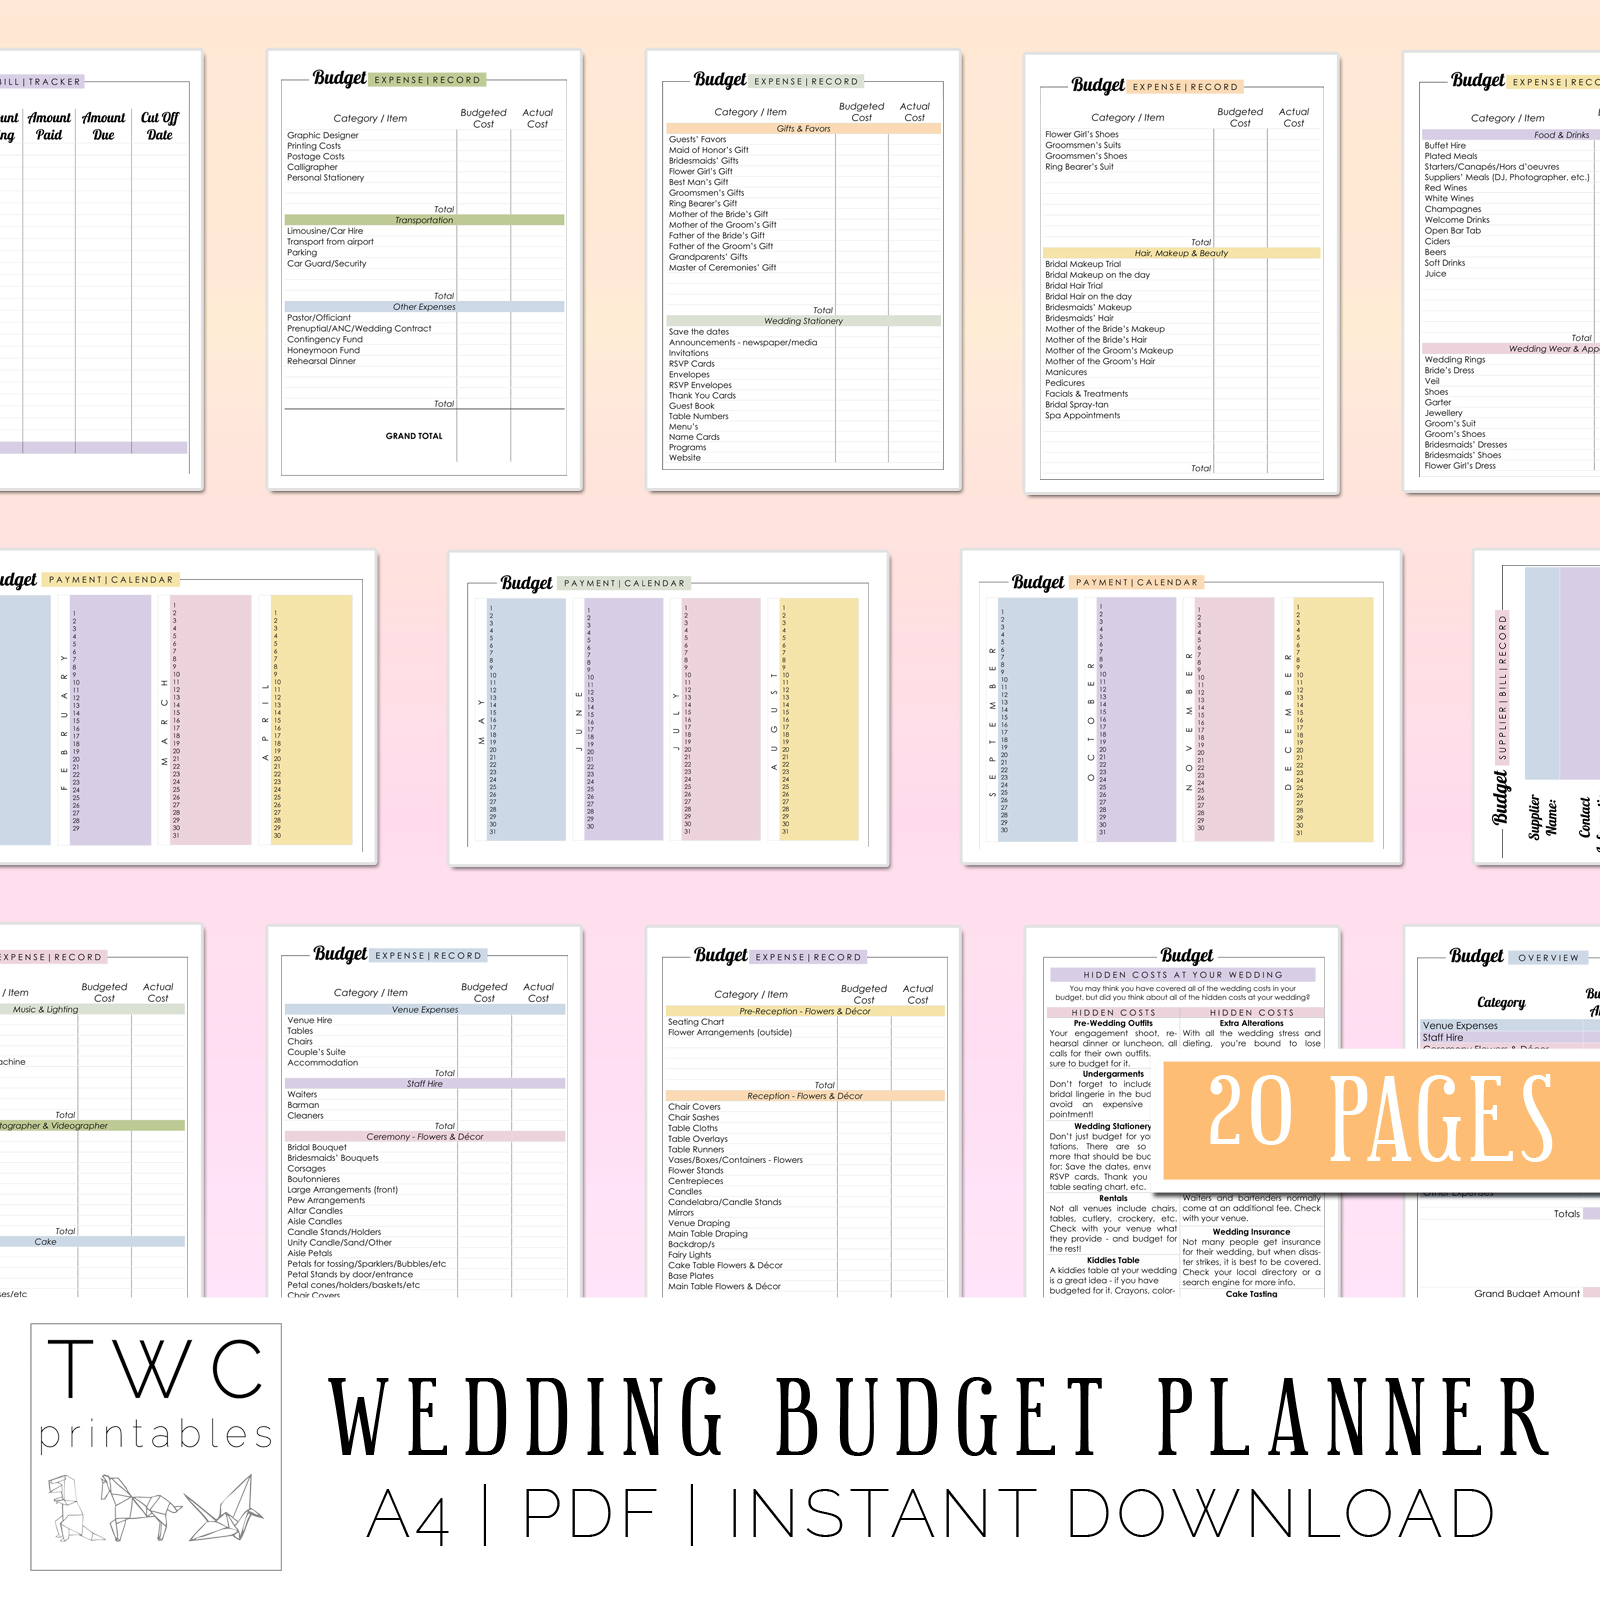 Wedding Budget Planner 2019 - plan every detail of your wedding budget! Plan your wedding budget with these amazing budget printables!